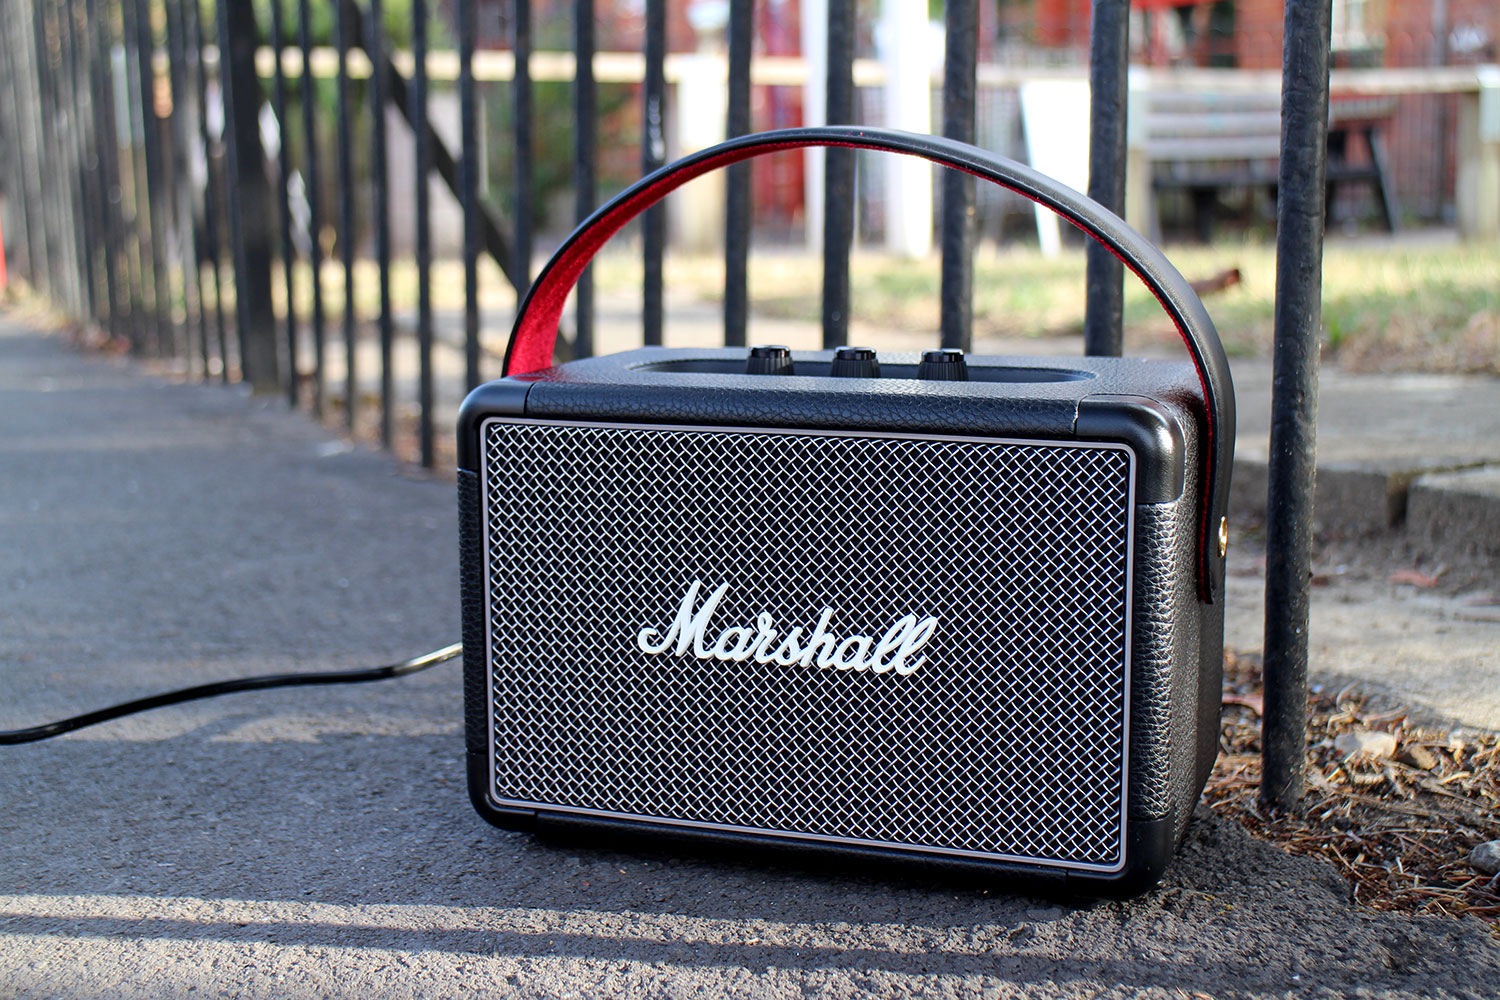 Marshall Stanmore 2 Vs. Kilburn 2: Which is Best?